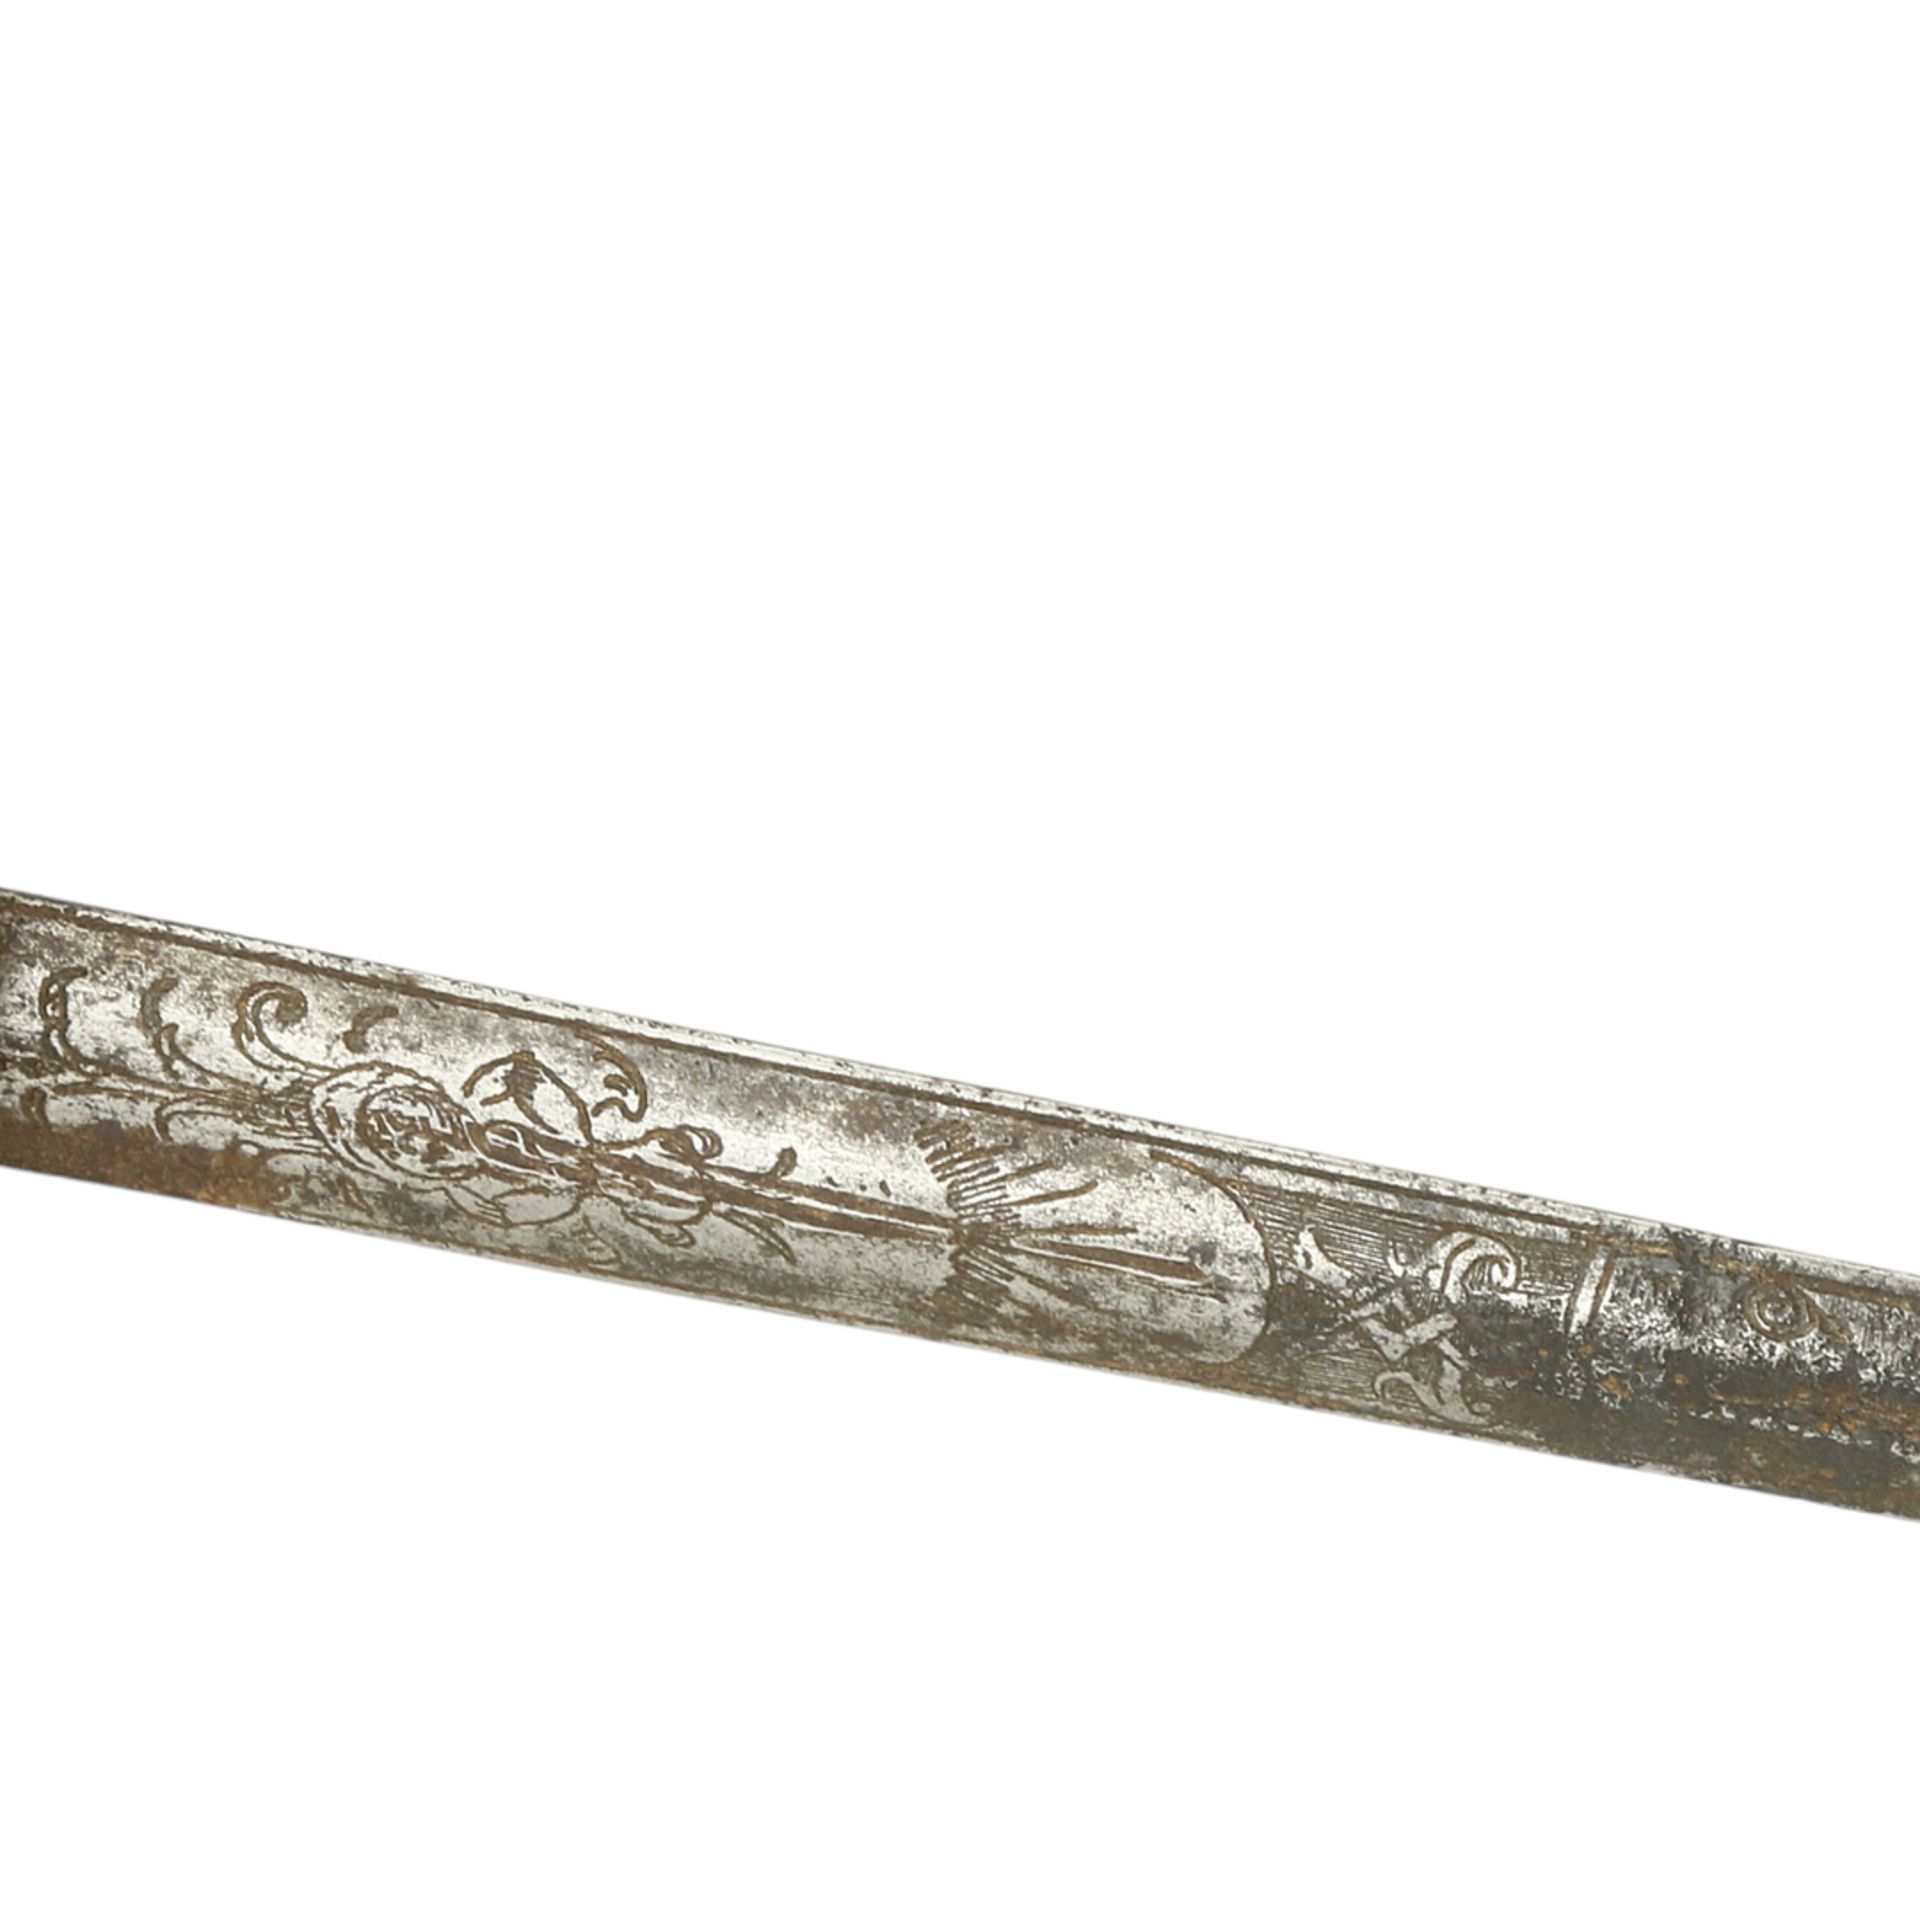 Probably a French decorative sword, around 1850 - Image 3 of 5